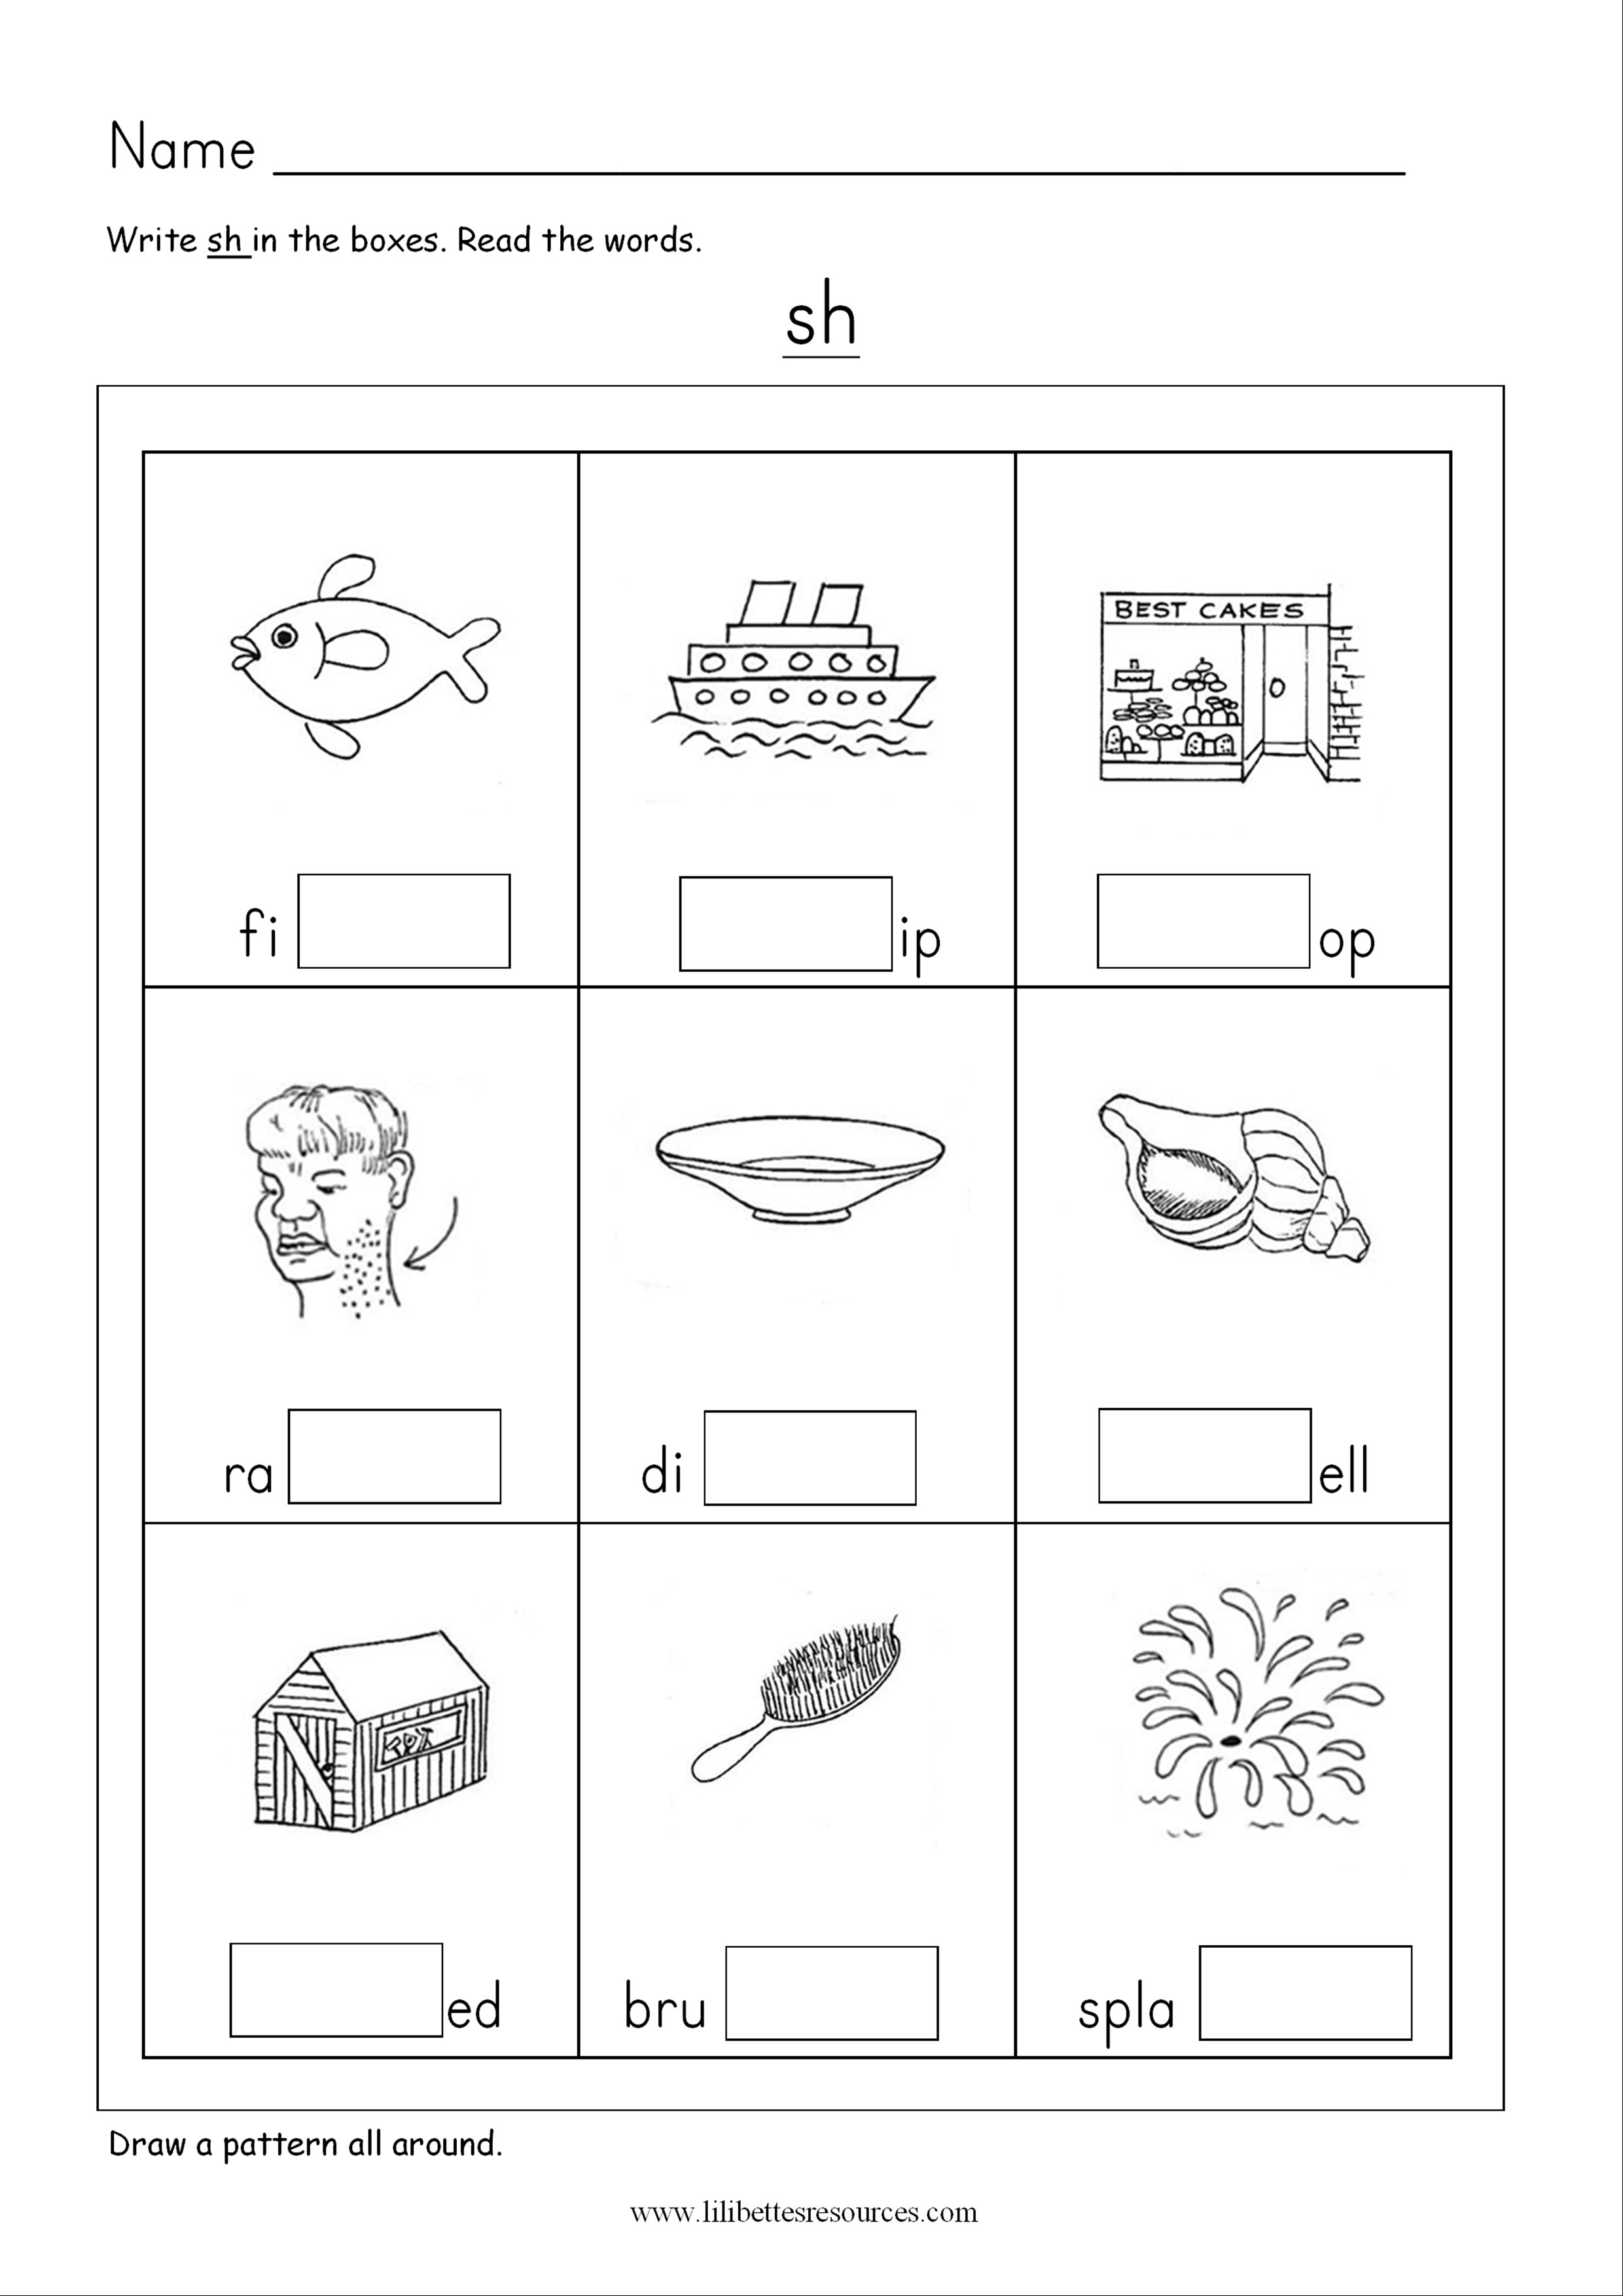 teaching-assistant-phase-2-phonics-resource-pack-phase-2-phonics